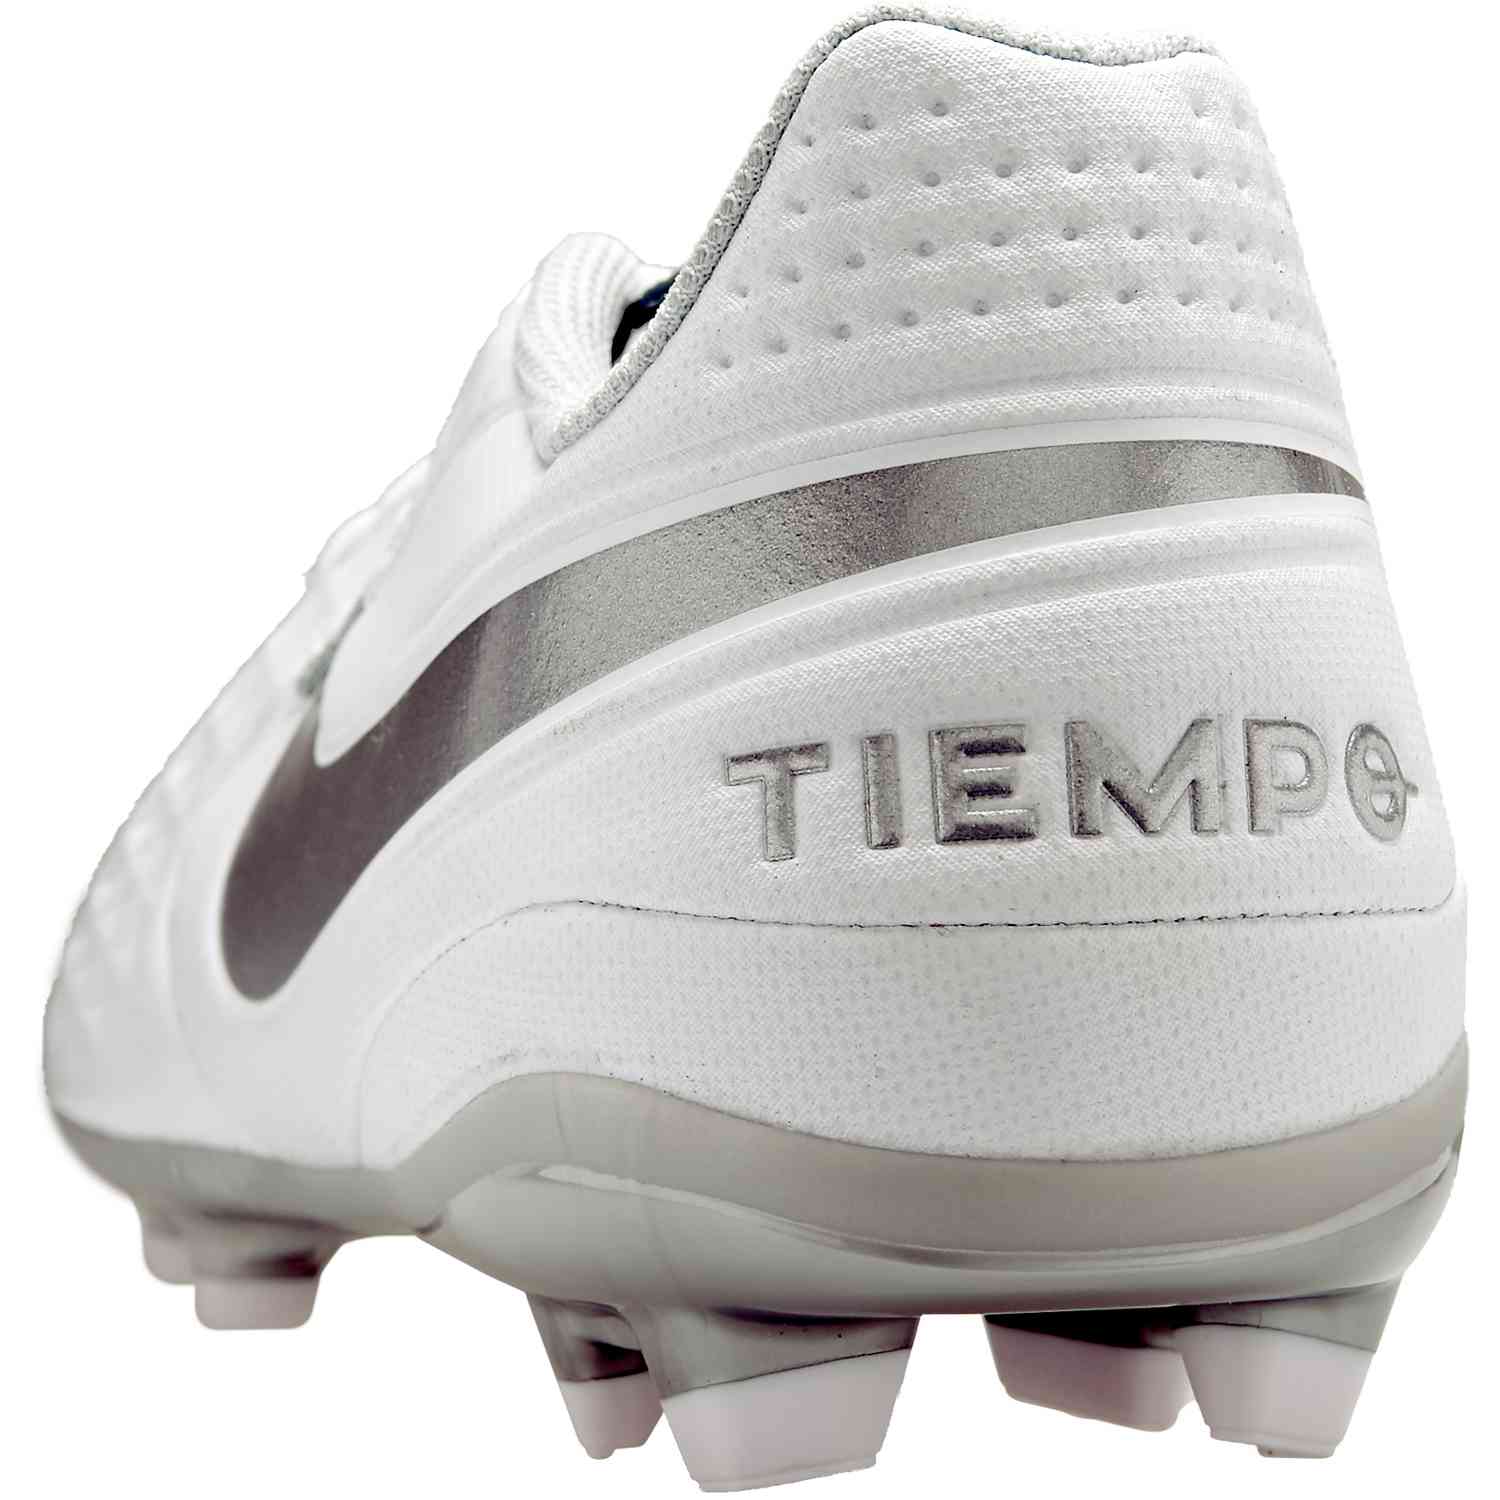 Women's Tiempo Soccer Cleats Best Price Guarantee at